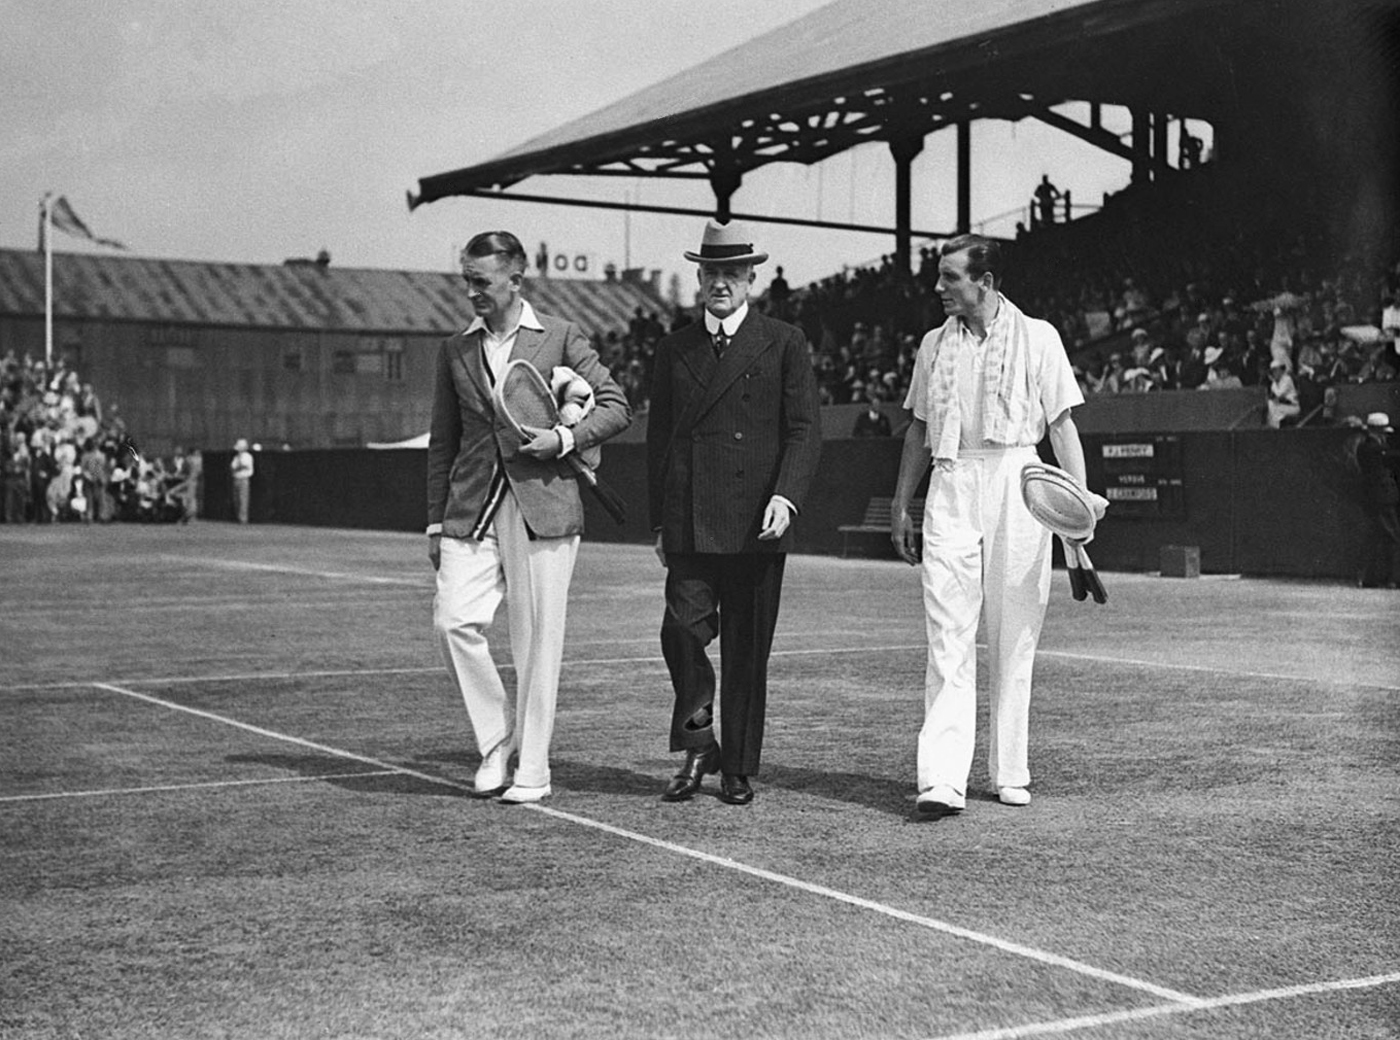 Australian tennis player Jack Crawford (left) and British tennis player Fred Perry (right) at the White City Stadium in Sydney, Australia with a senior tennis offical (center) 1930s